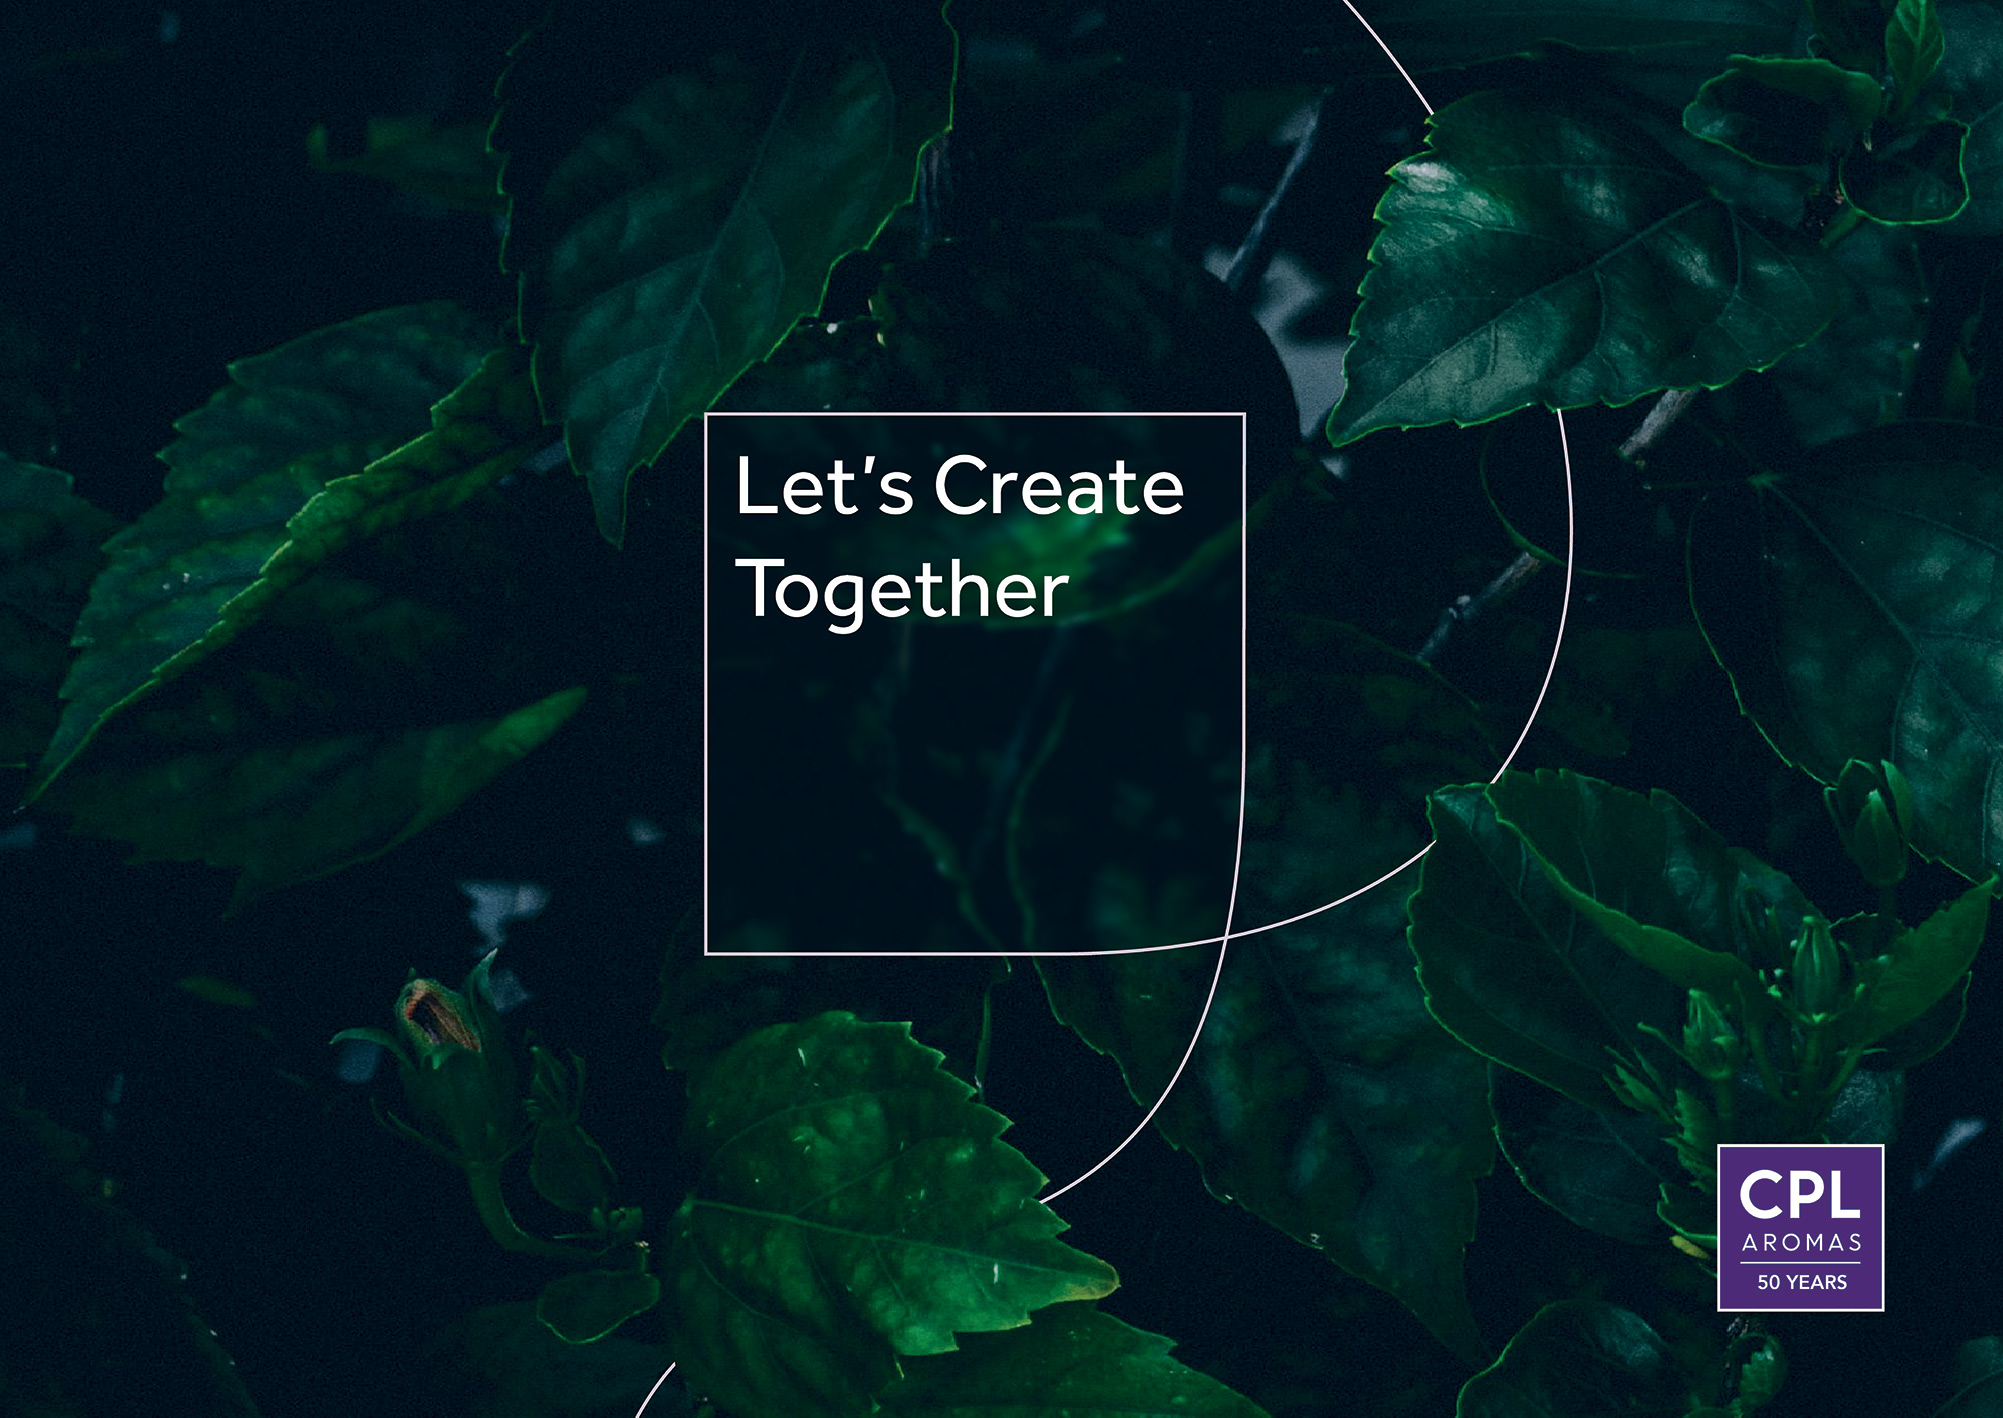 Let's create together